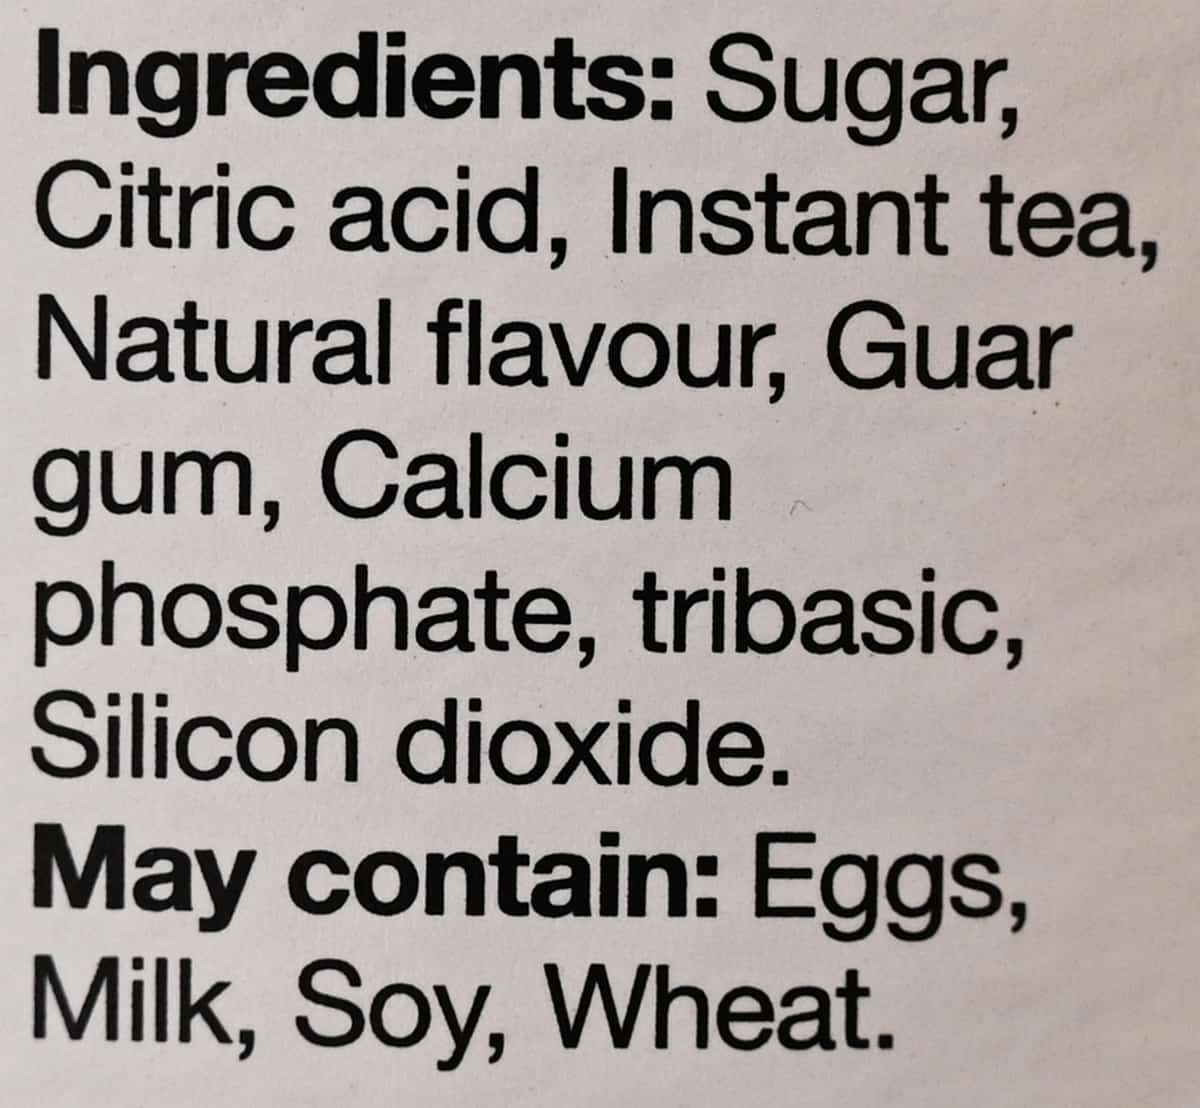 Image of the ingredients label from the back of the container.